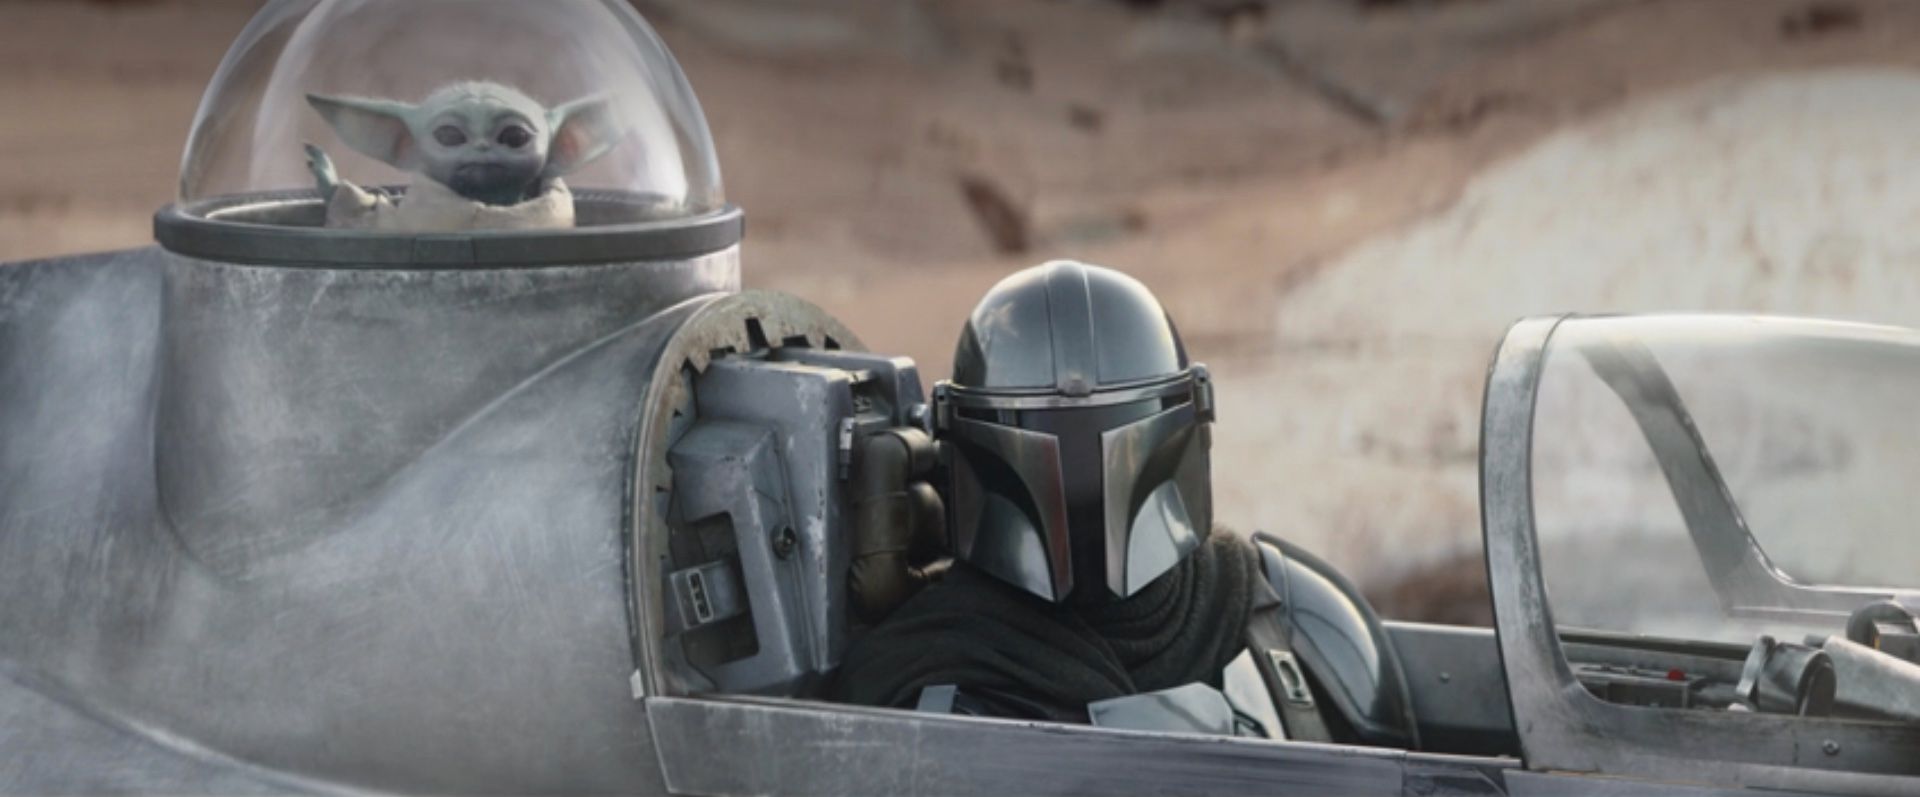 The Mandalorian S3E3: Key takeaways and massive hint for Episode 4